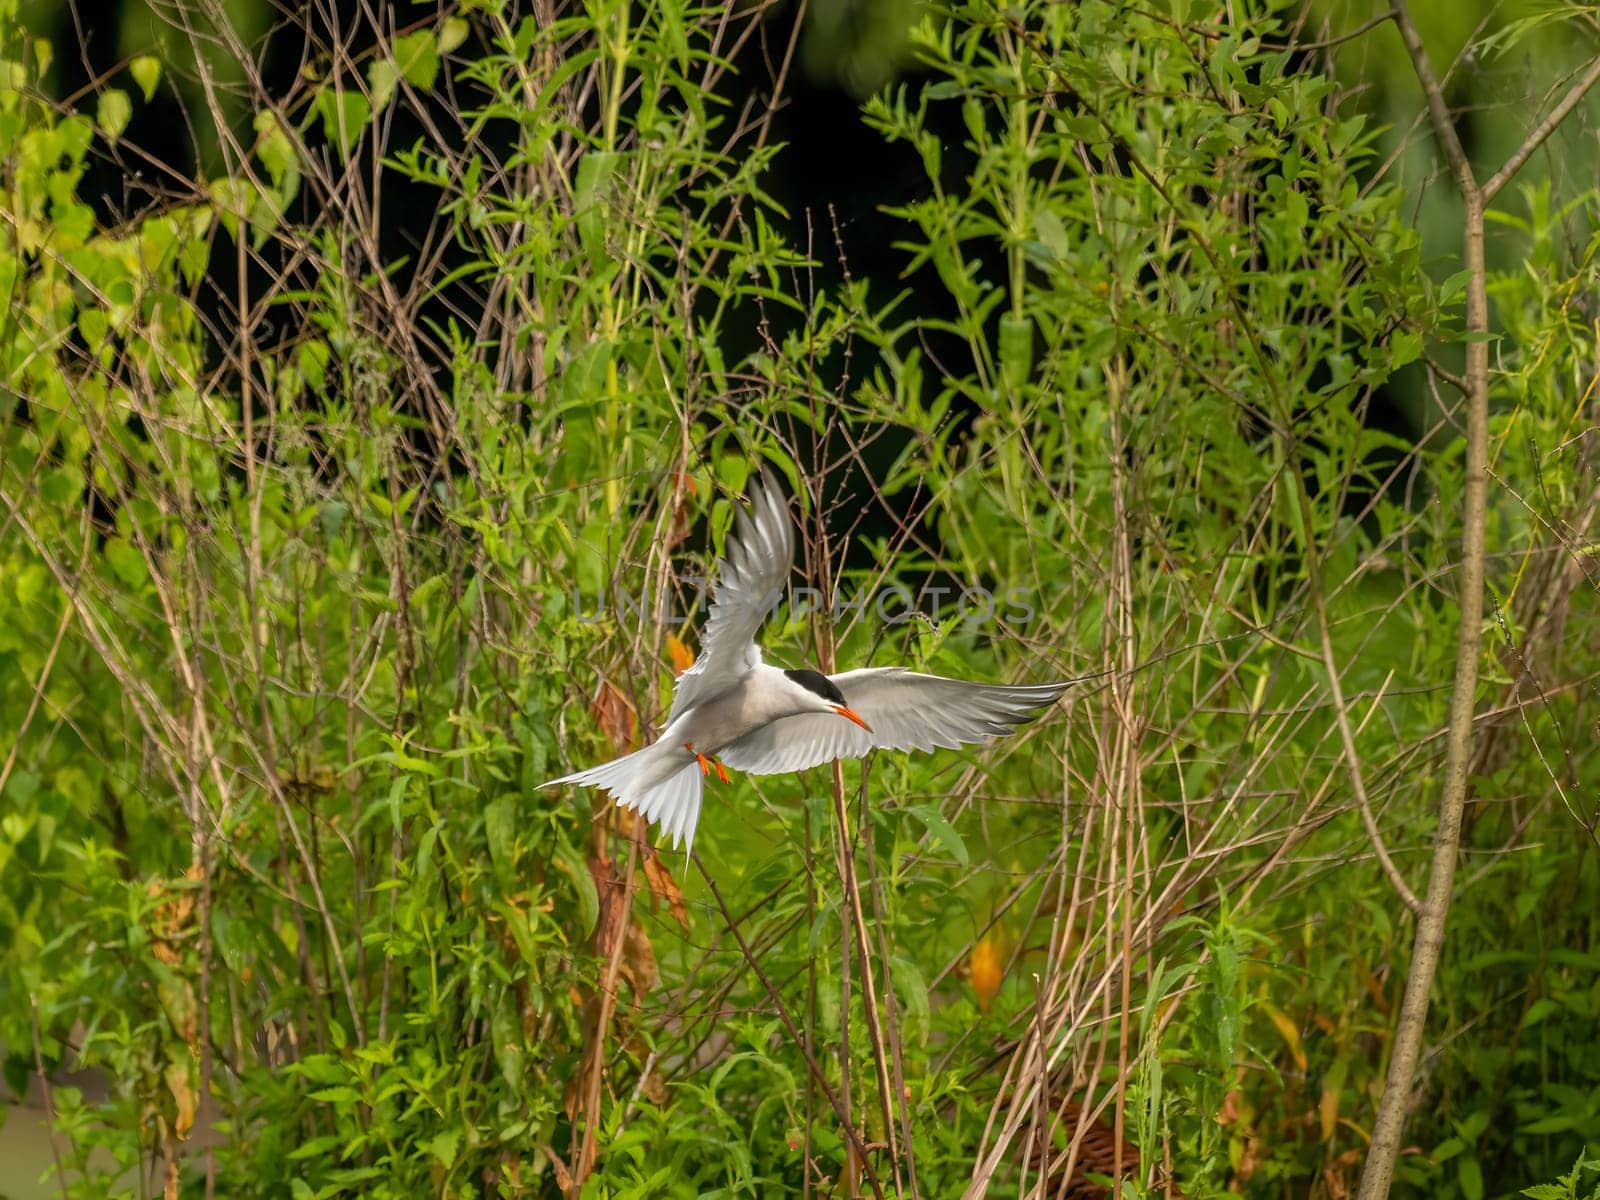 Common tern in flight against a background of greenery. by NatureTron